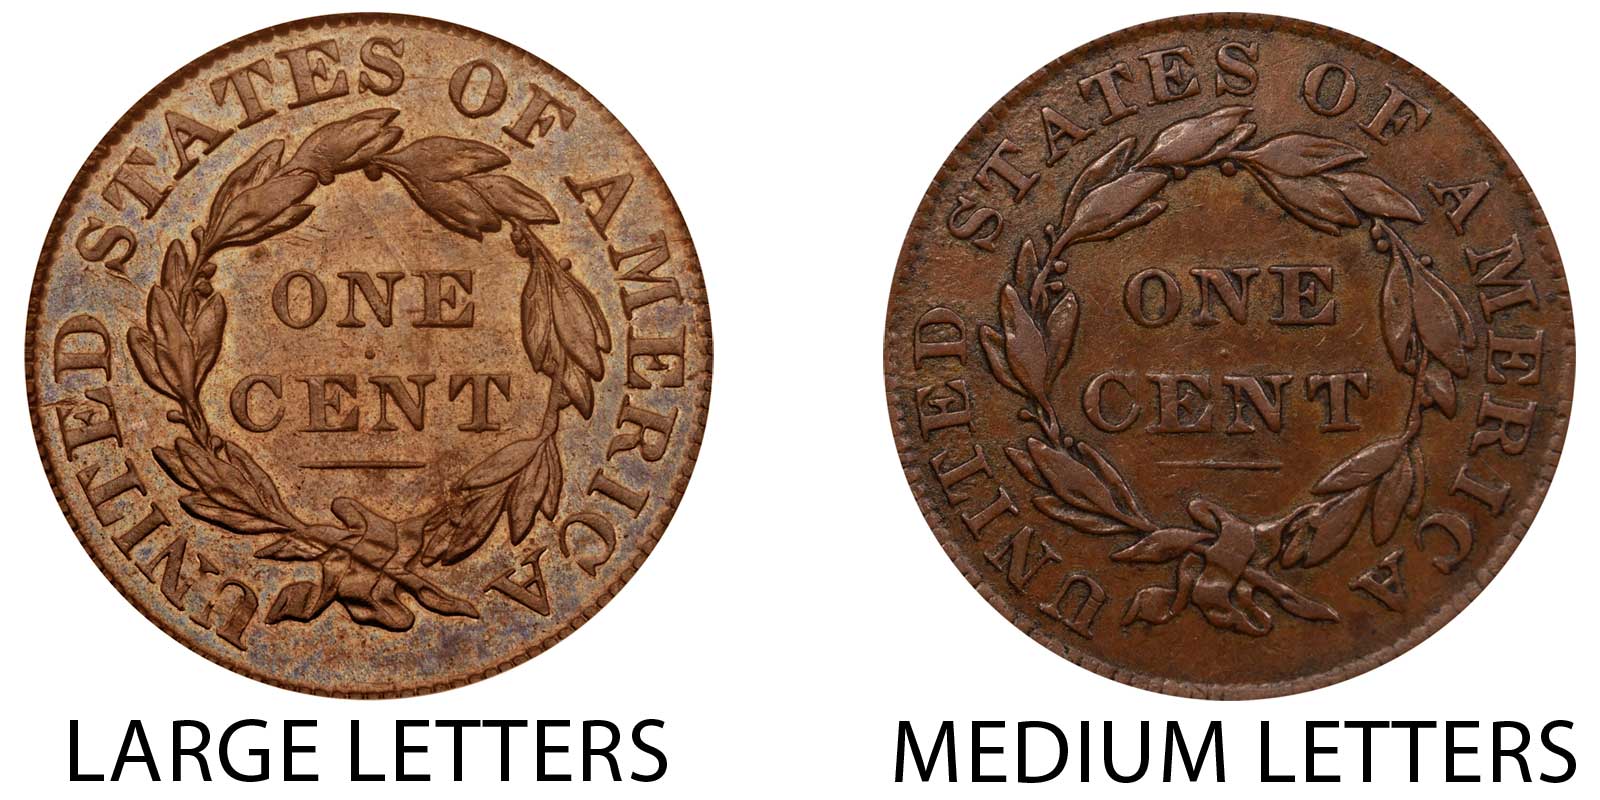 https://www.usacoinbook.com/us-coins/1834-large-letters-vs-medium-letters-coronet-head-large-cent.jpg